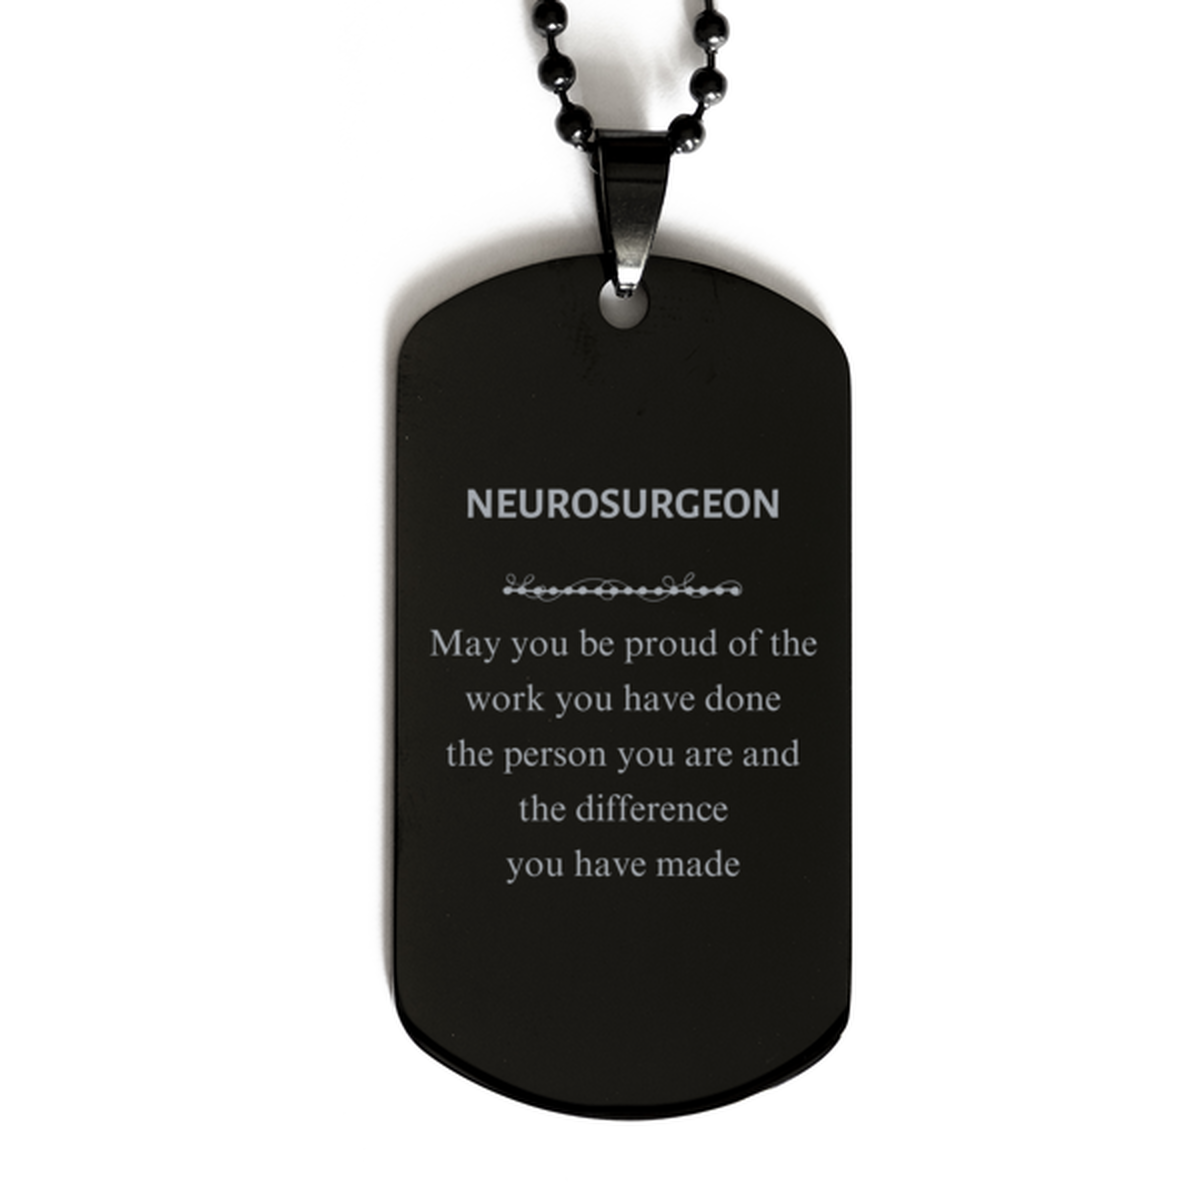 Neurosurgeon May you be proud of the work you have done, Retirement Neurosurgeon Black Dog Tag for Colleague Appreciation Gifts Amazing for Neurosurgeon